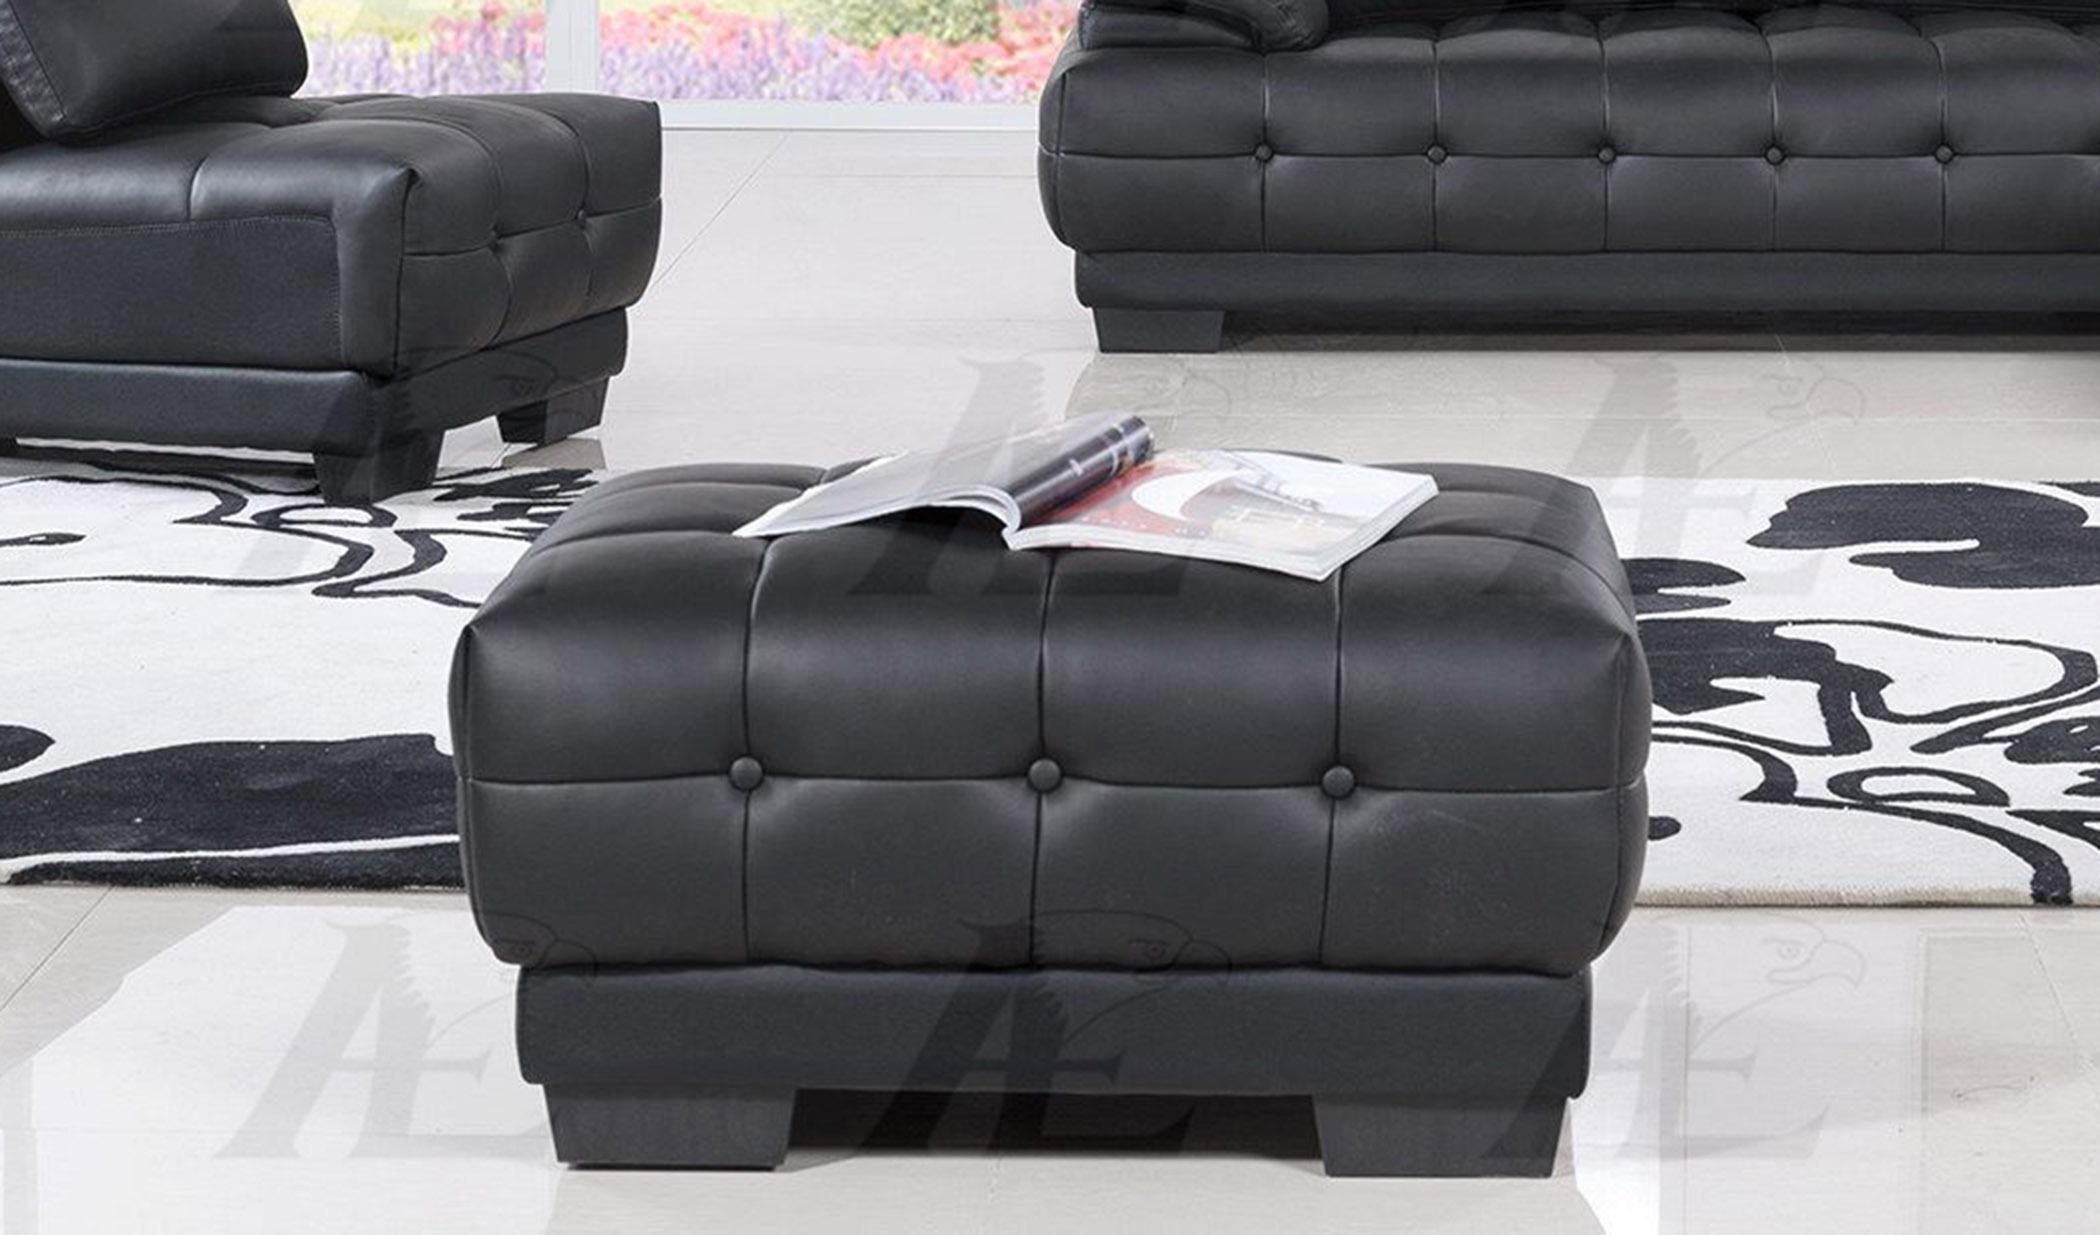 

                    
American Eagle Furniture AE-L296-BK Sofa Chaise Chair and Ottoman Set Black Bonded Leather Purchase 
